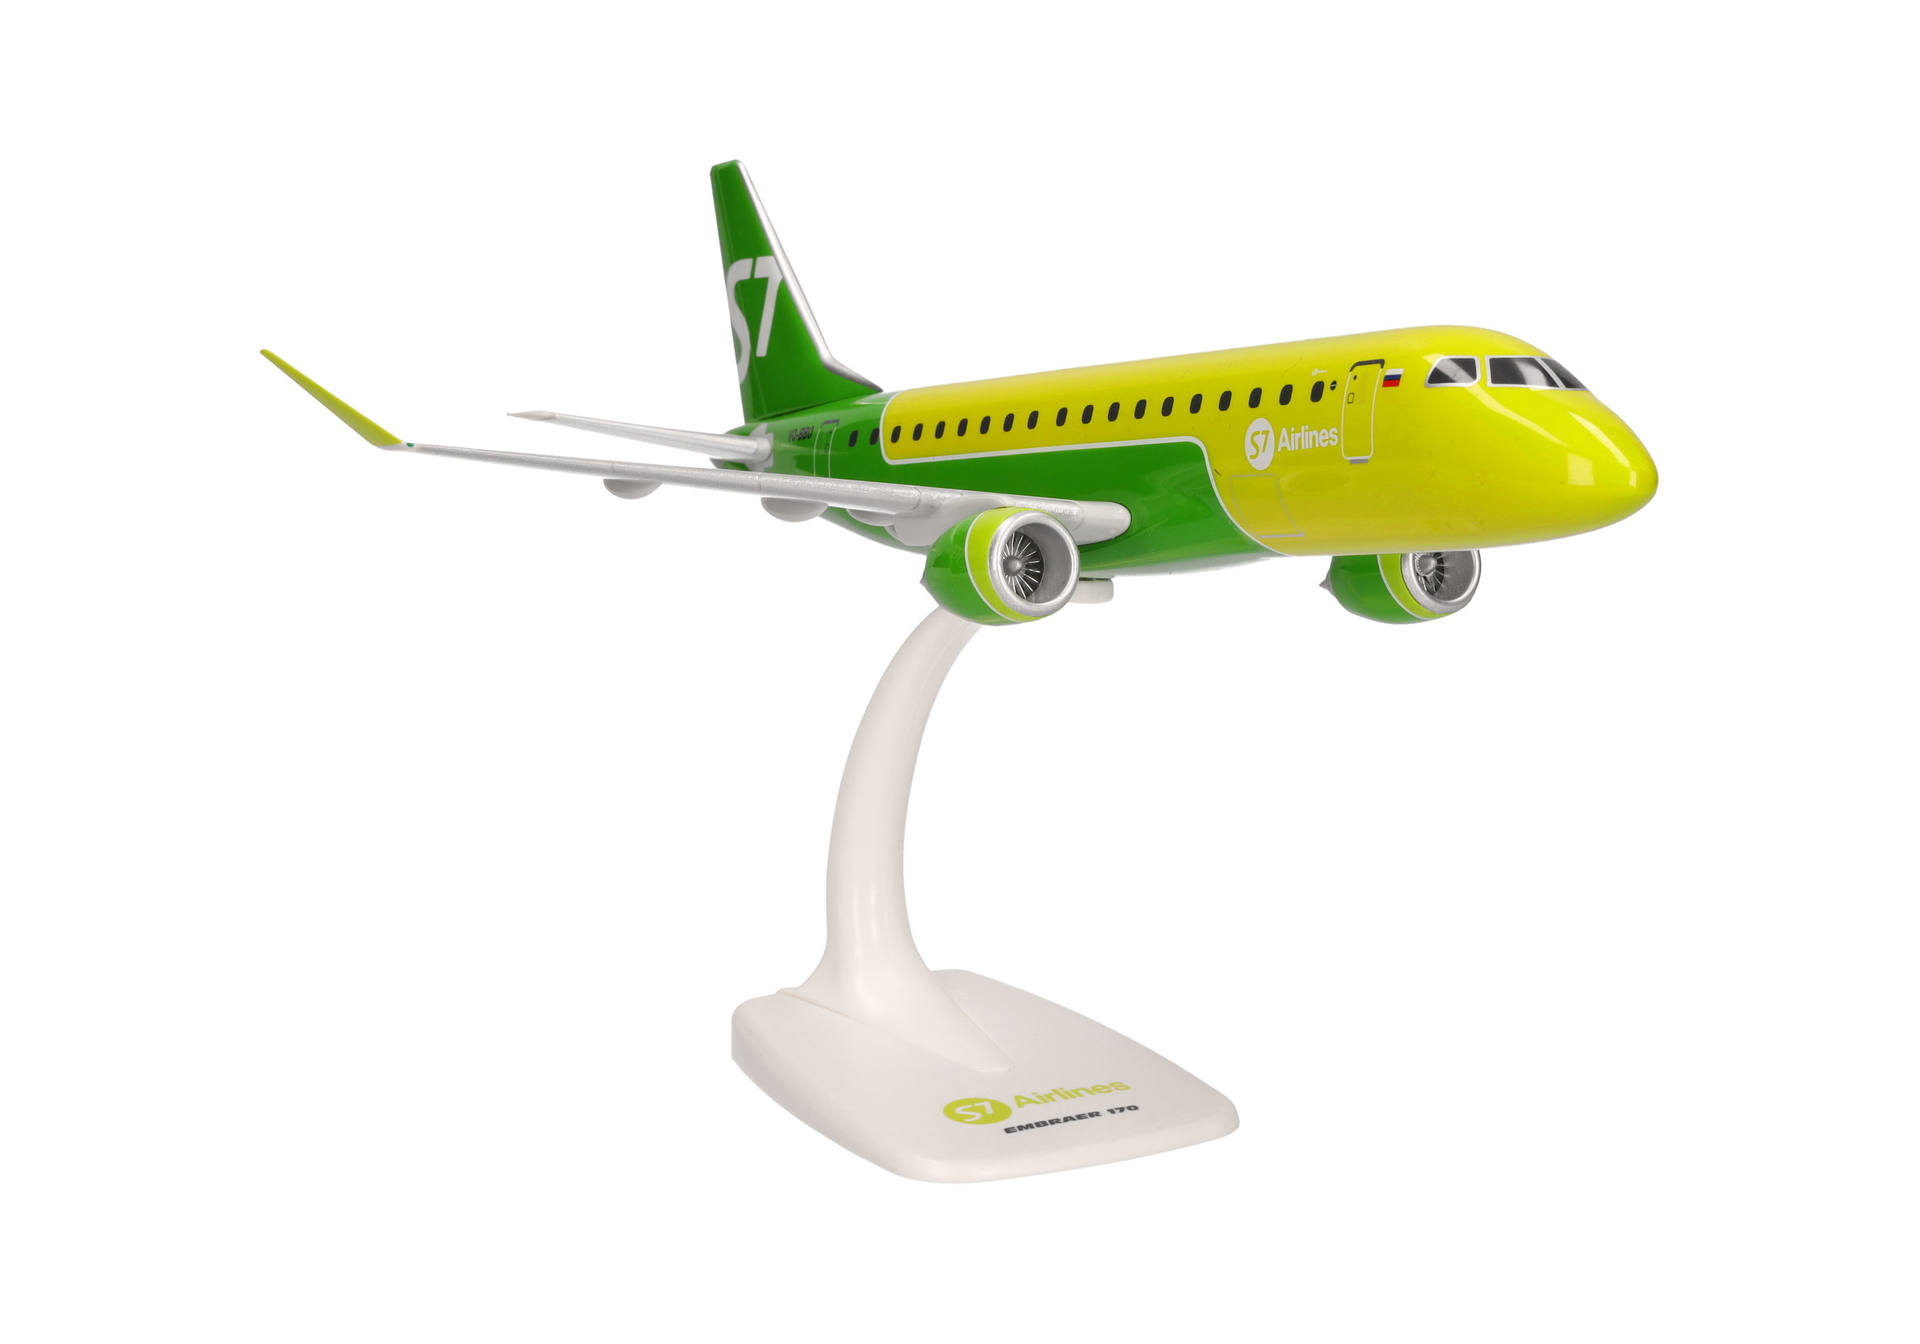 S7 Airlines Embraer E170